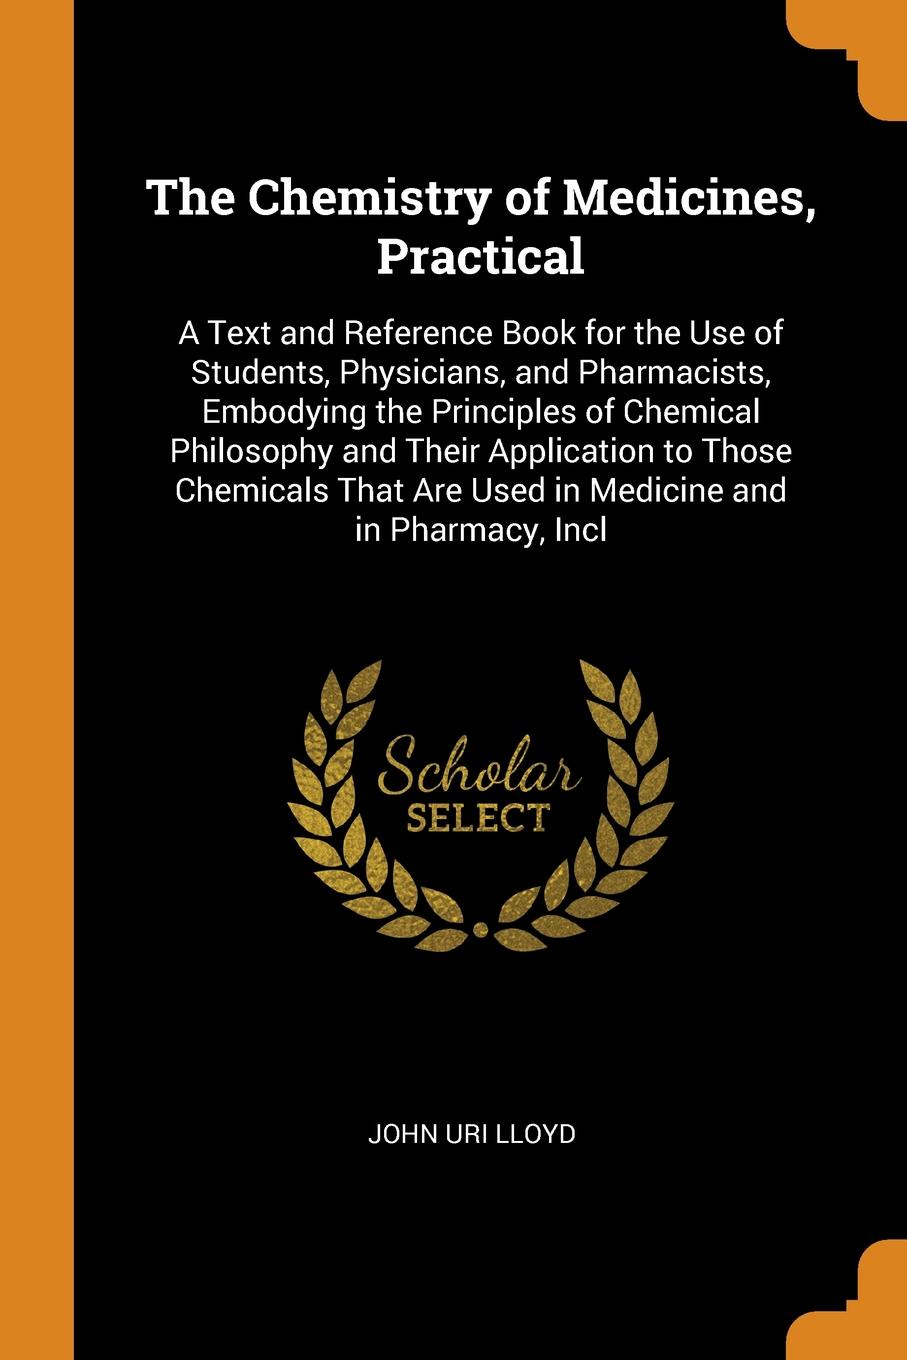 The Chemistry of Medicines, Practical. A Text and Reference Book for the Use of Students, Physicians, and Pharmacists, Embodying the Principles of Chemical Philosophy and Their Application to Those Chemicals That Are Used in Medicine and in Pharma...